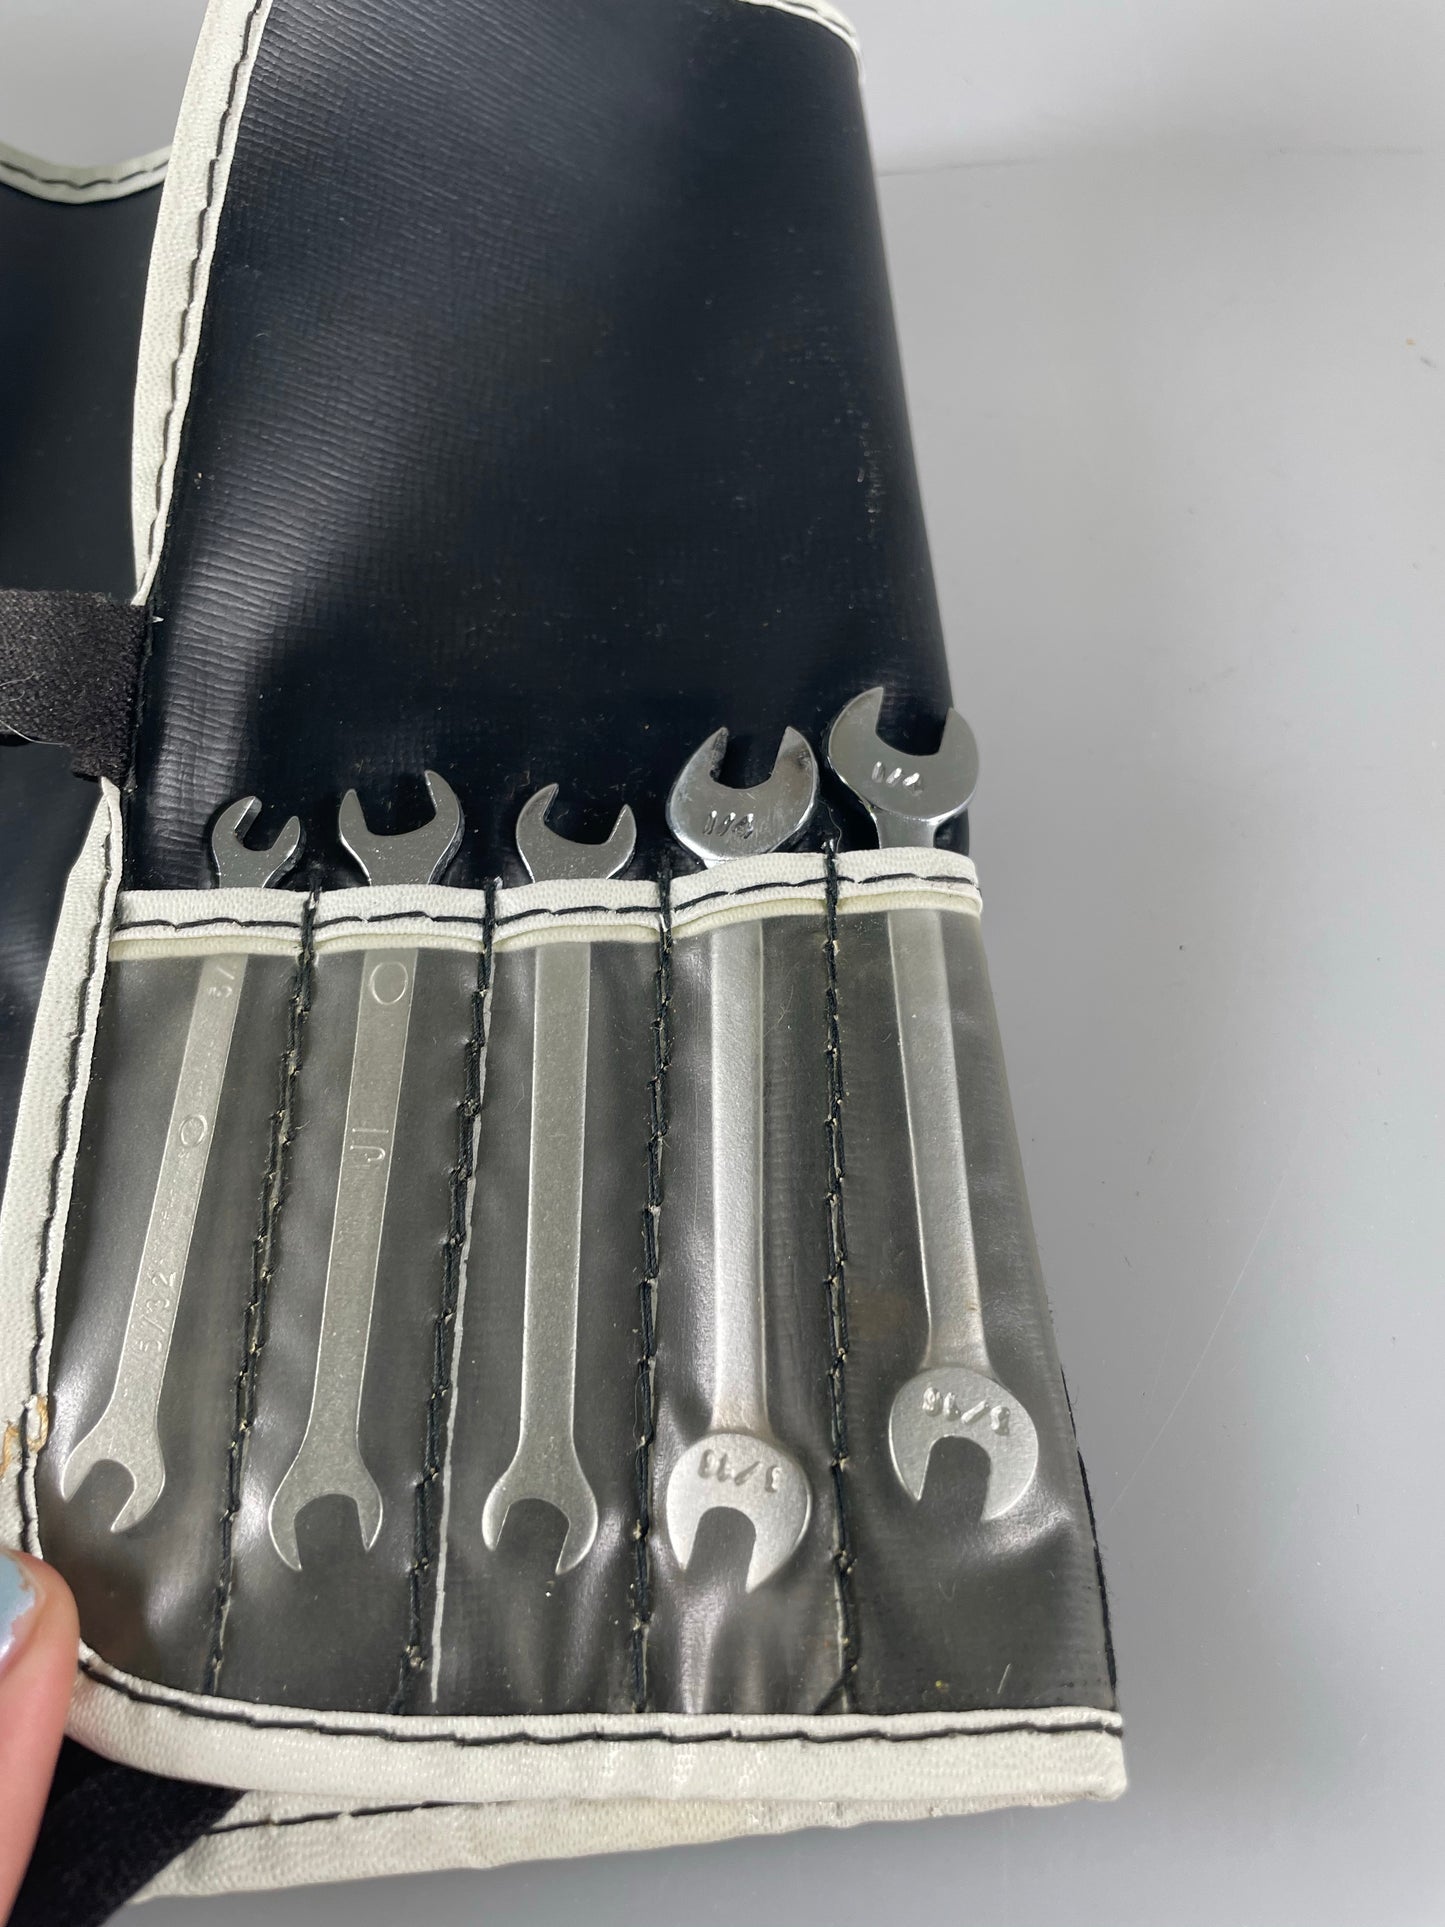 Armstrong USA Wrench set tool 5/32 to 3/4 (8 pieces)